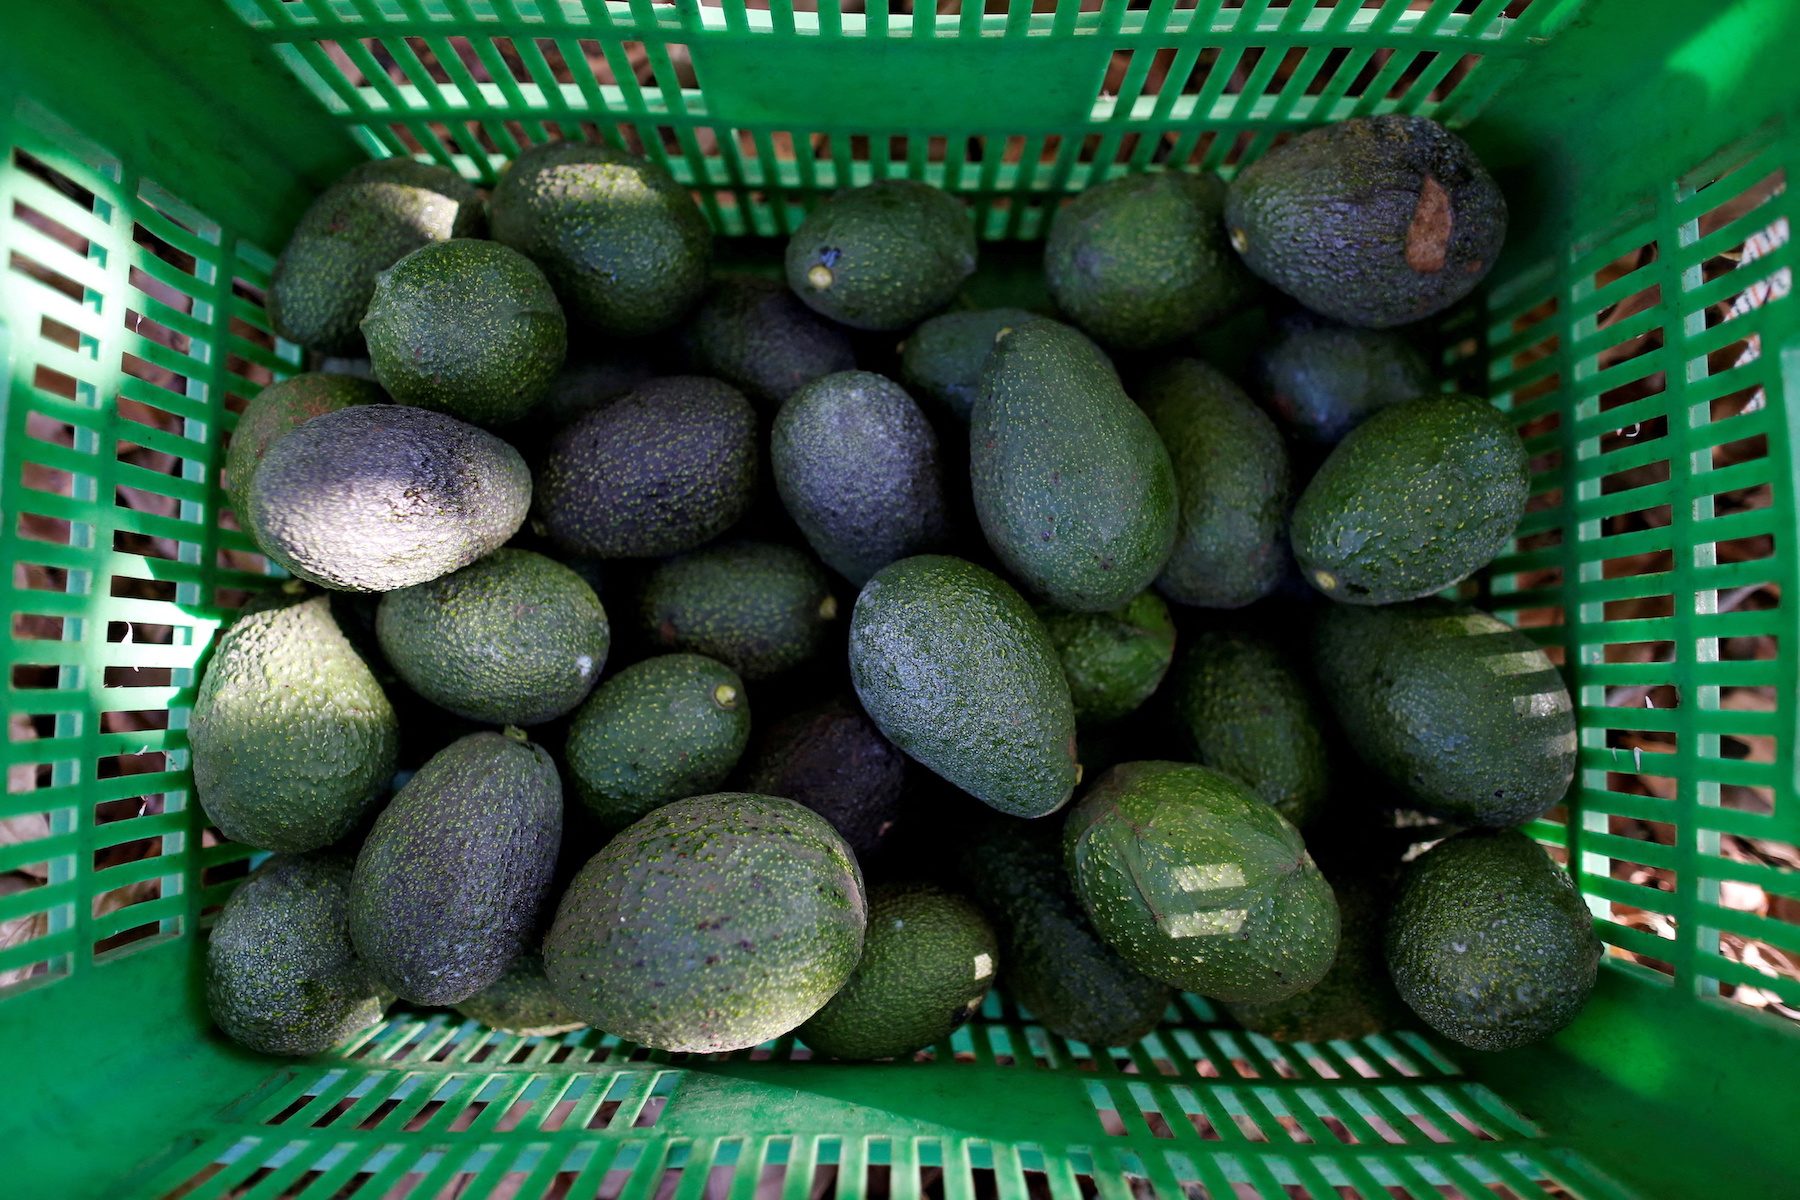 US to halt Mexican avocado imports ‘as long as necessary’ to ensure worker safety